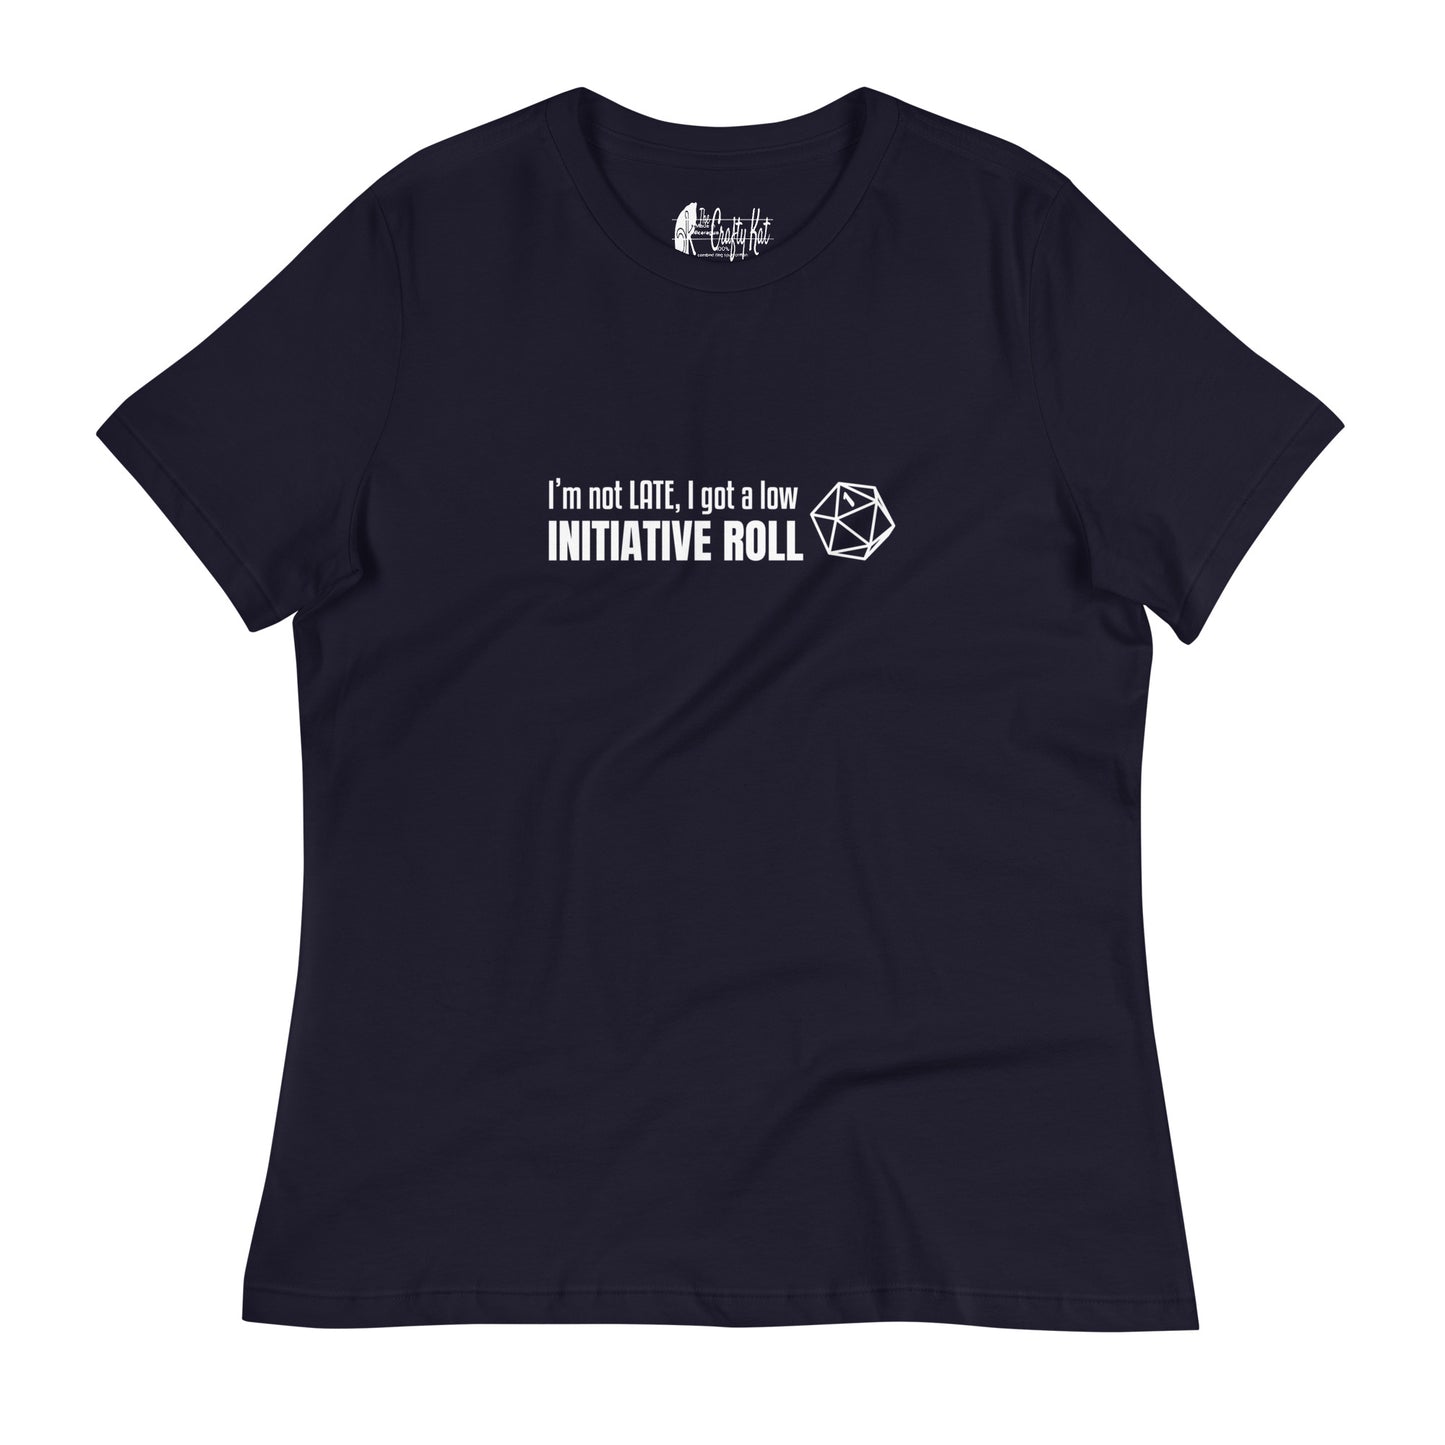 Navy women's relaxed-fit t-shirt with a graphic of a d20 (twenty-sided die) showing a roll of "1" and text: "I'm not LATE, I got a low INITIATIVE ROLL"